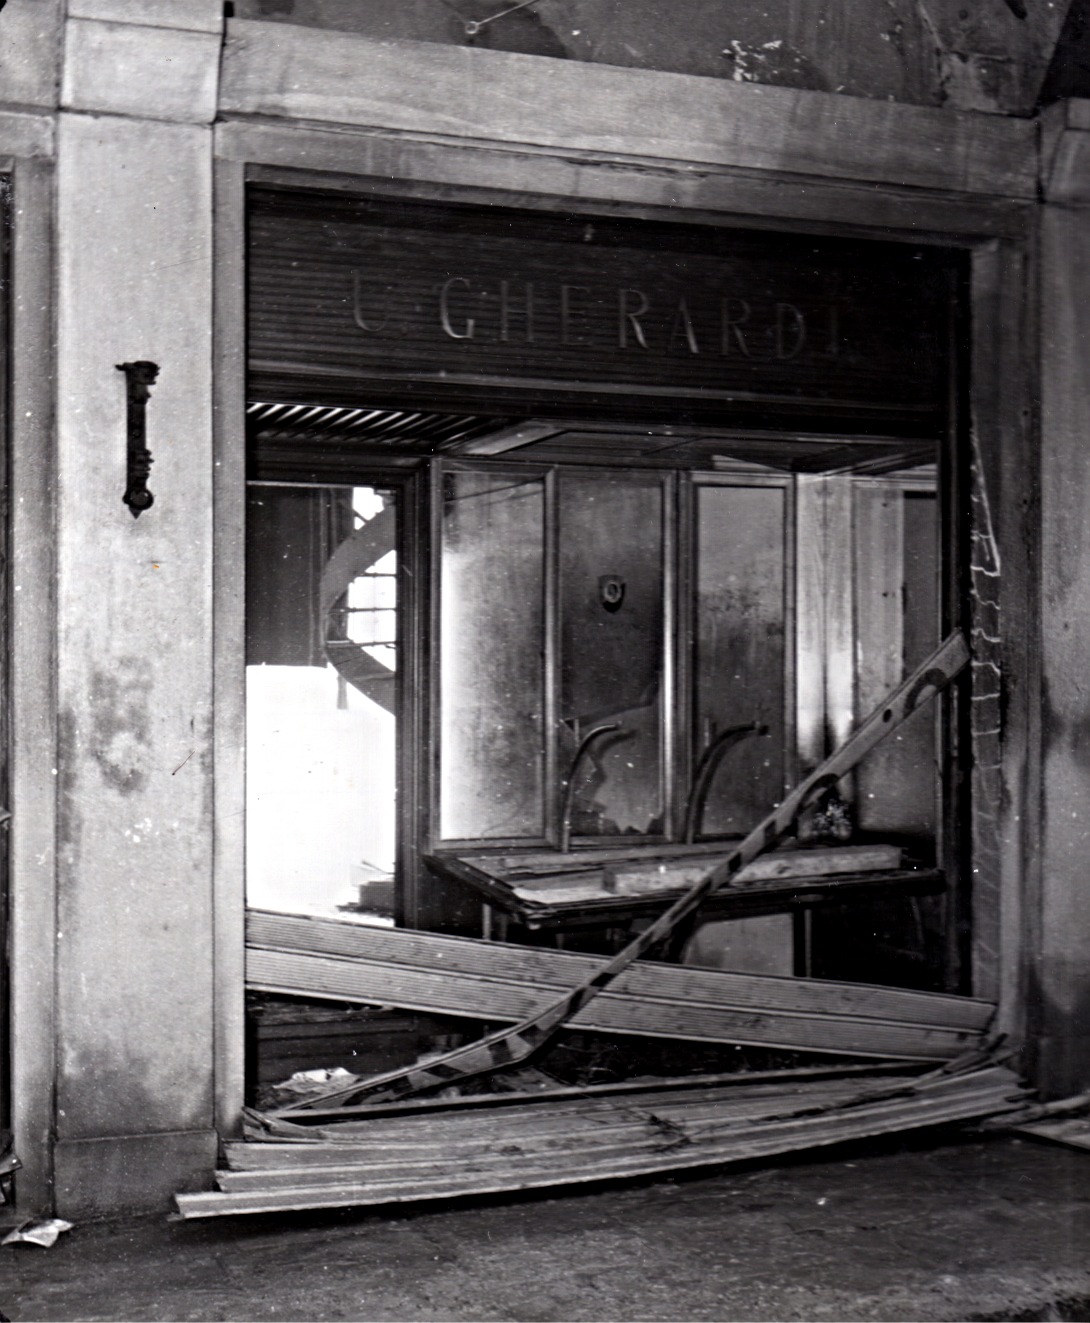 Exterior of Gherardi jeweller's store after the 1966 Florence flood / photo courtesy of Ugo Gherardi for publication in The Florentine